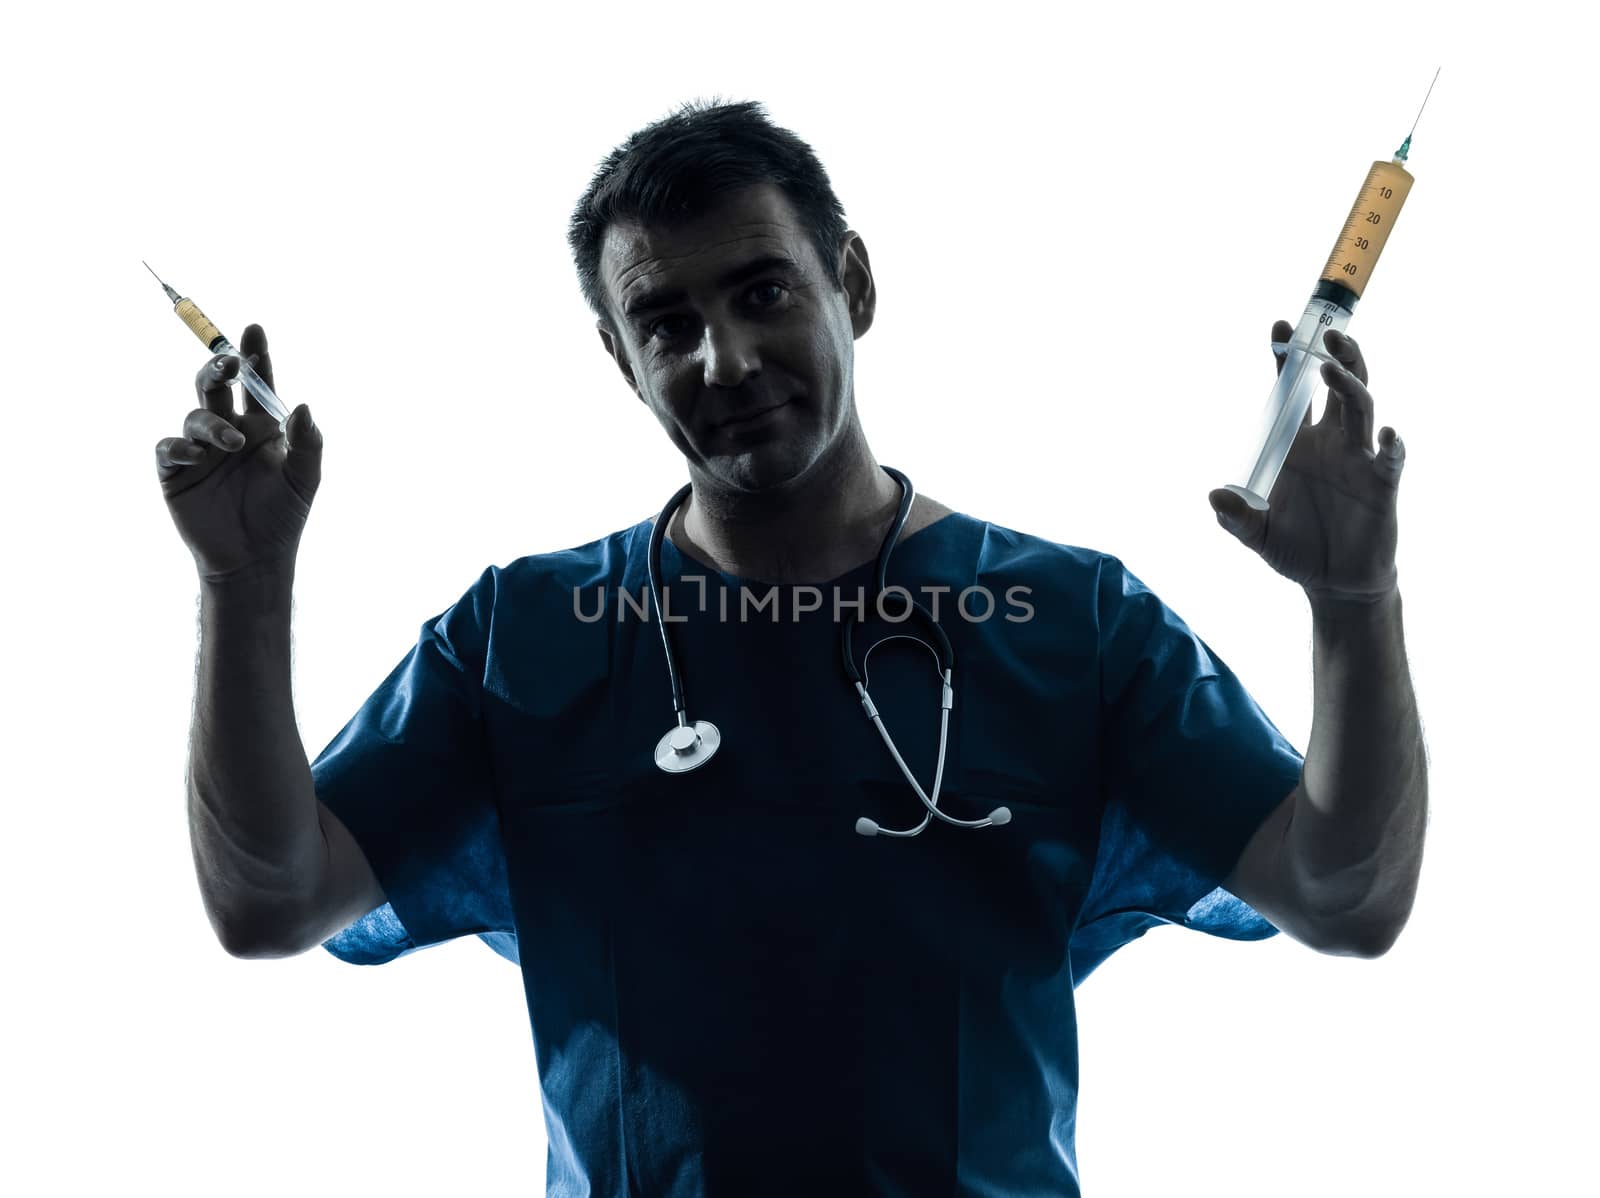 one caucasian man doctor surgeon medical worker holding hypodermic syringe  silhouette isolated on white background